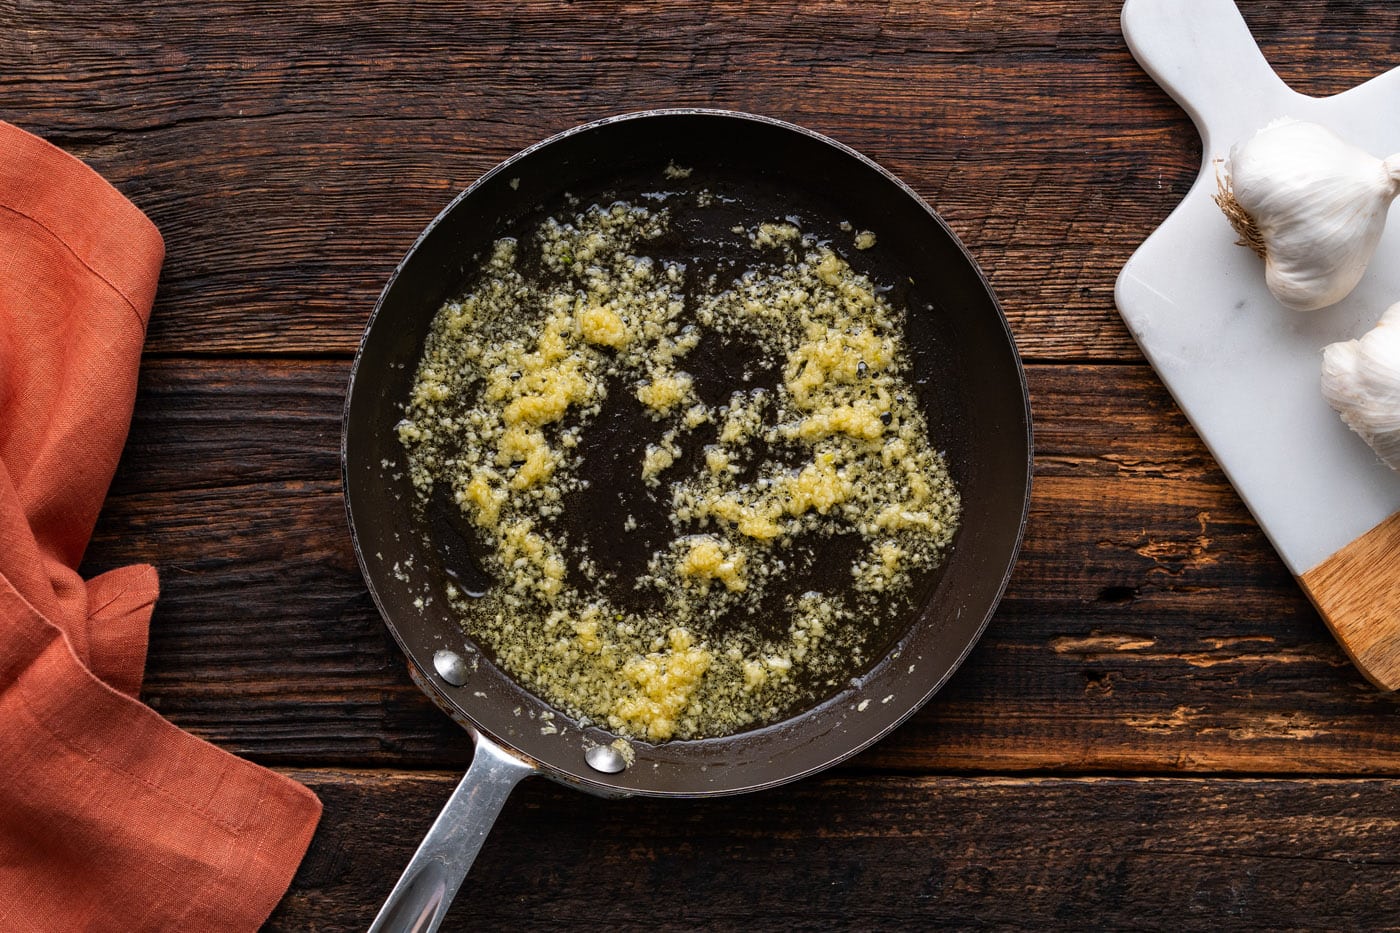 oil and minced garlic cooking in a skillet